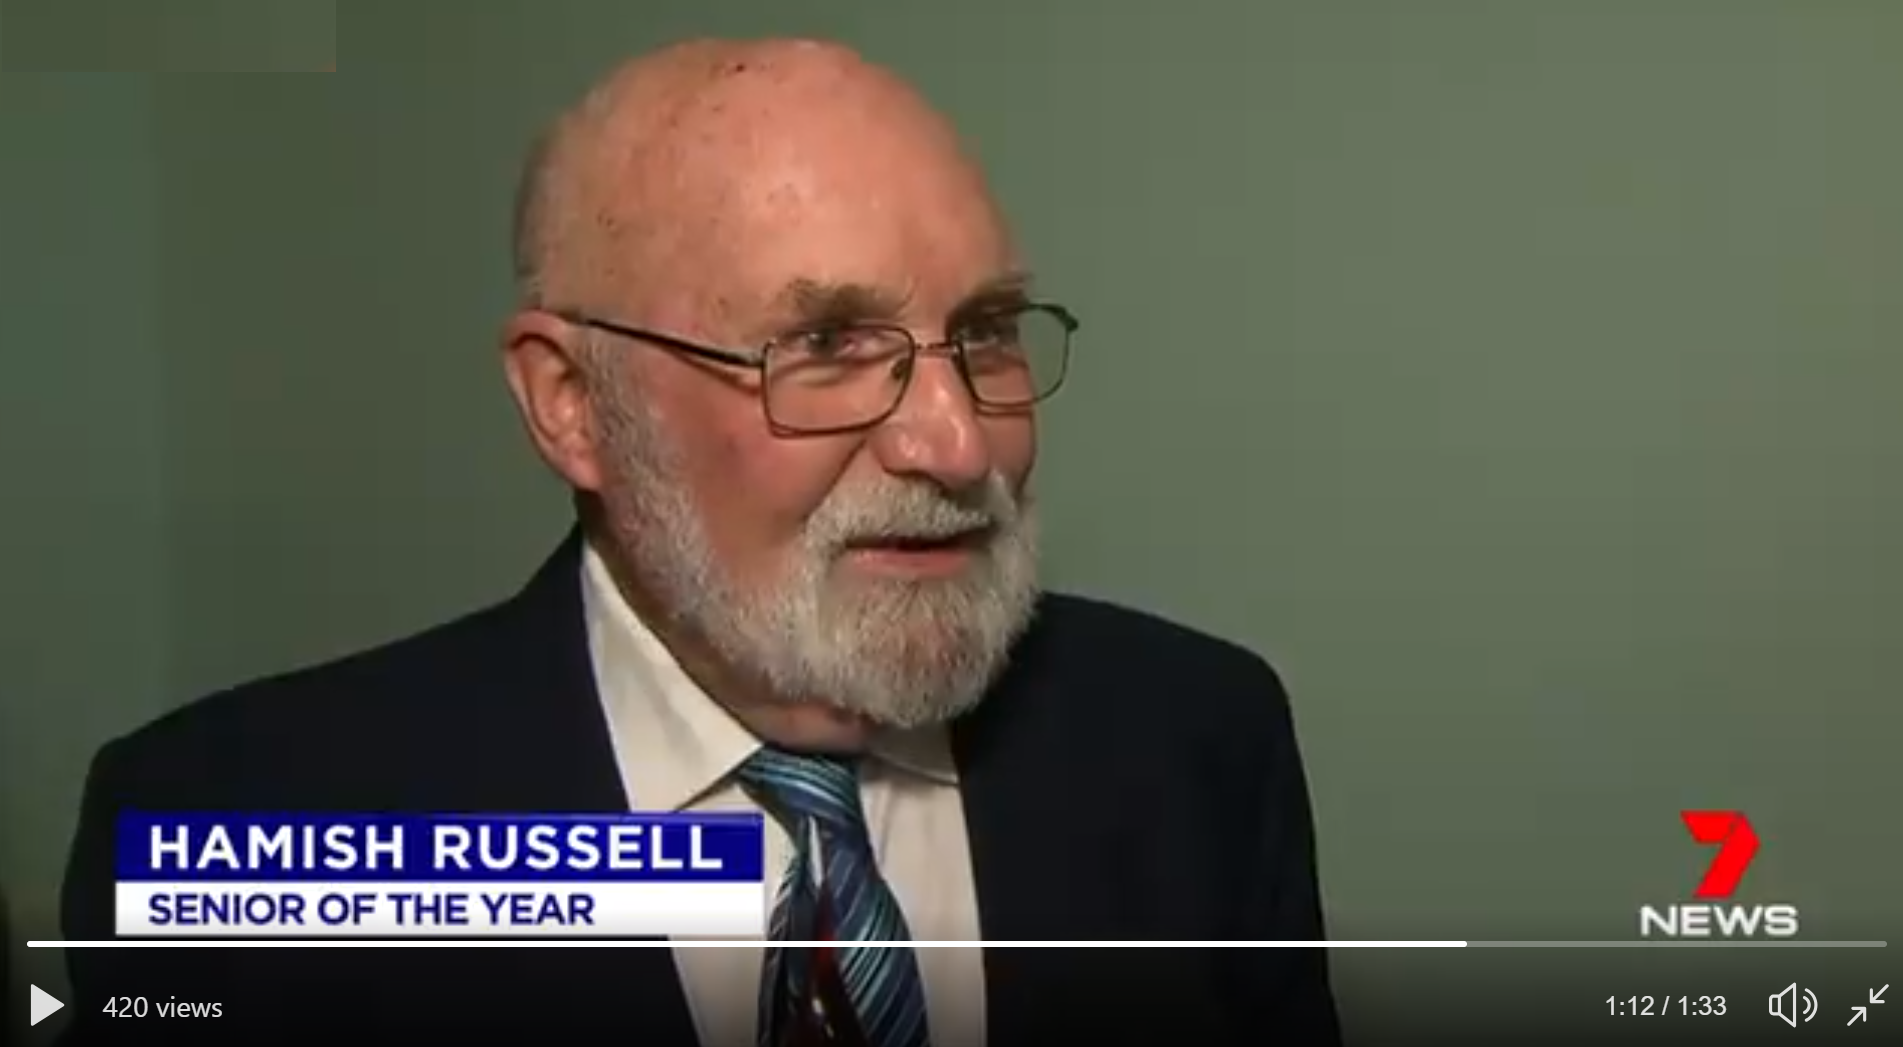 Hamish Russell, Community Advisory Committee member awarded Victorian Senior of the Year 2018